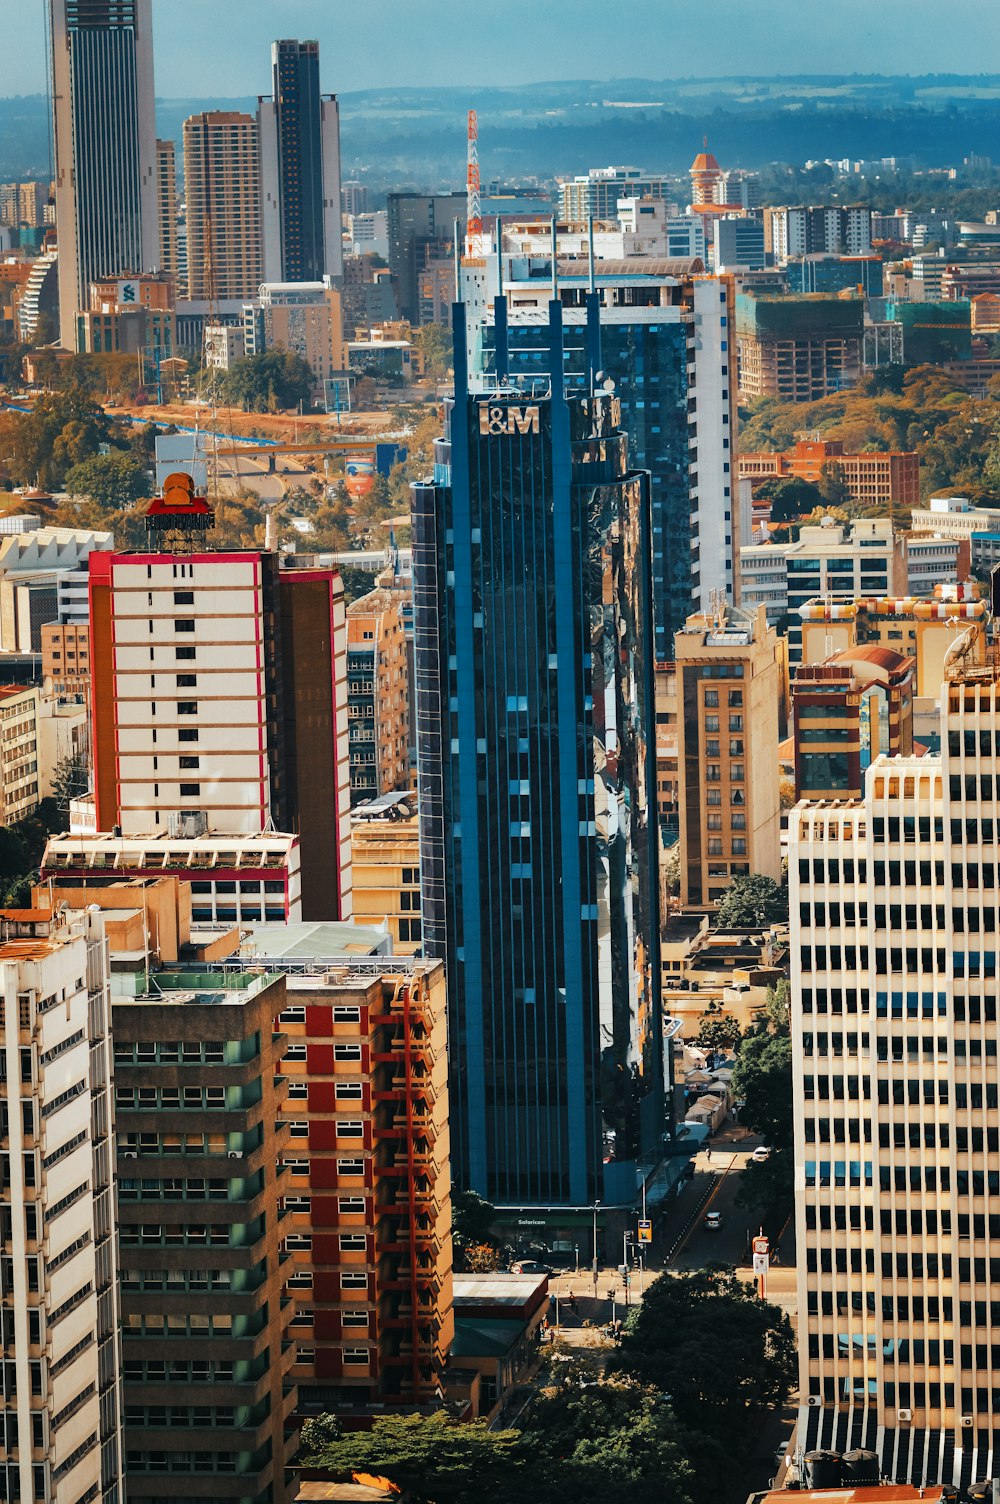 A section of Nairobi. The city remained relatively robust financially until the end of president Mwai Kibaki's first term. www.theexchange.africa